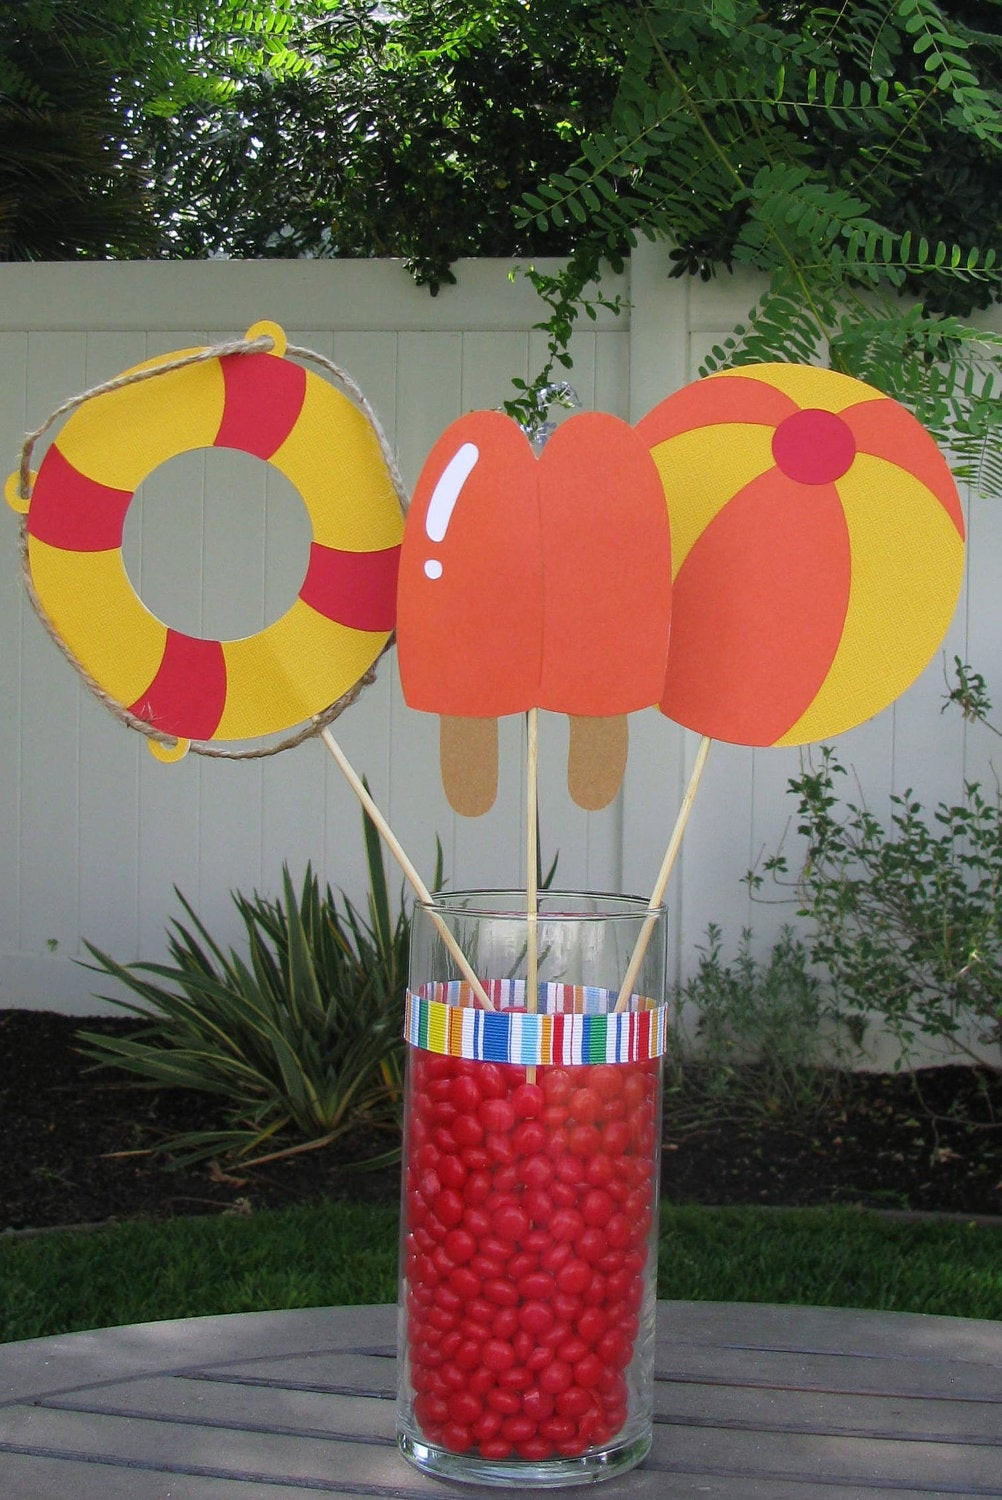 Pool Party Decoration Ideas
 Pool Party Table Decorations Set of 3 MADE TO ORDER